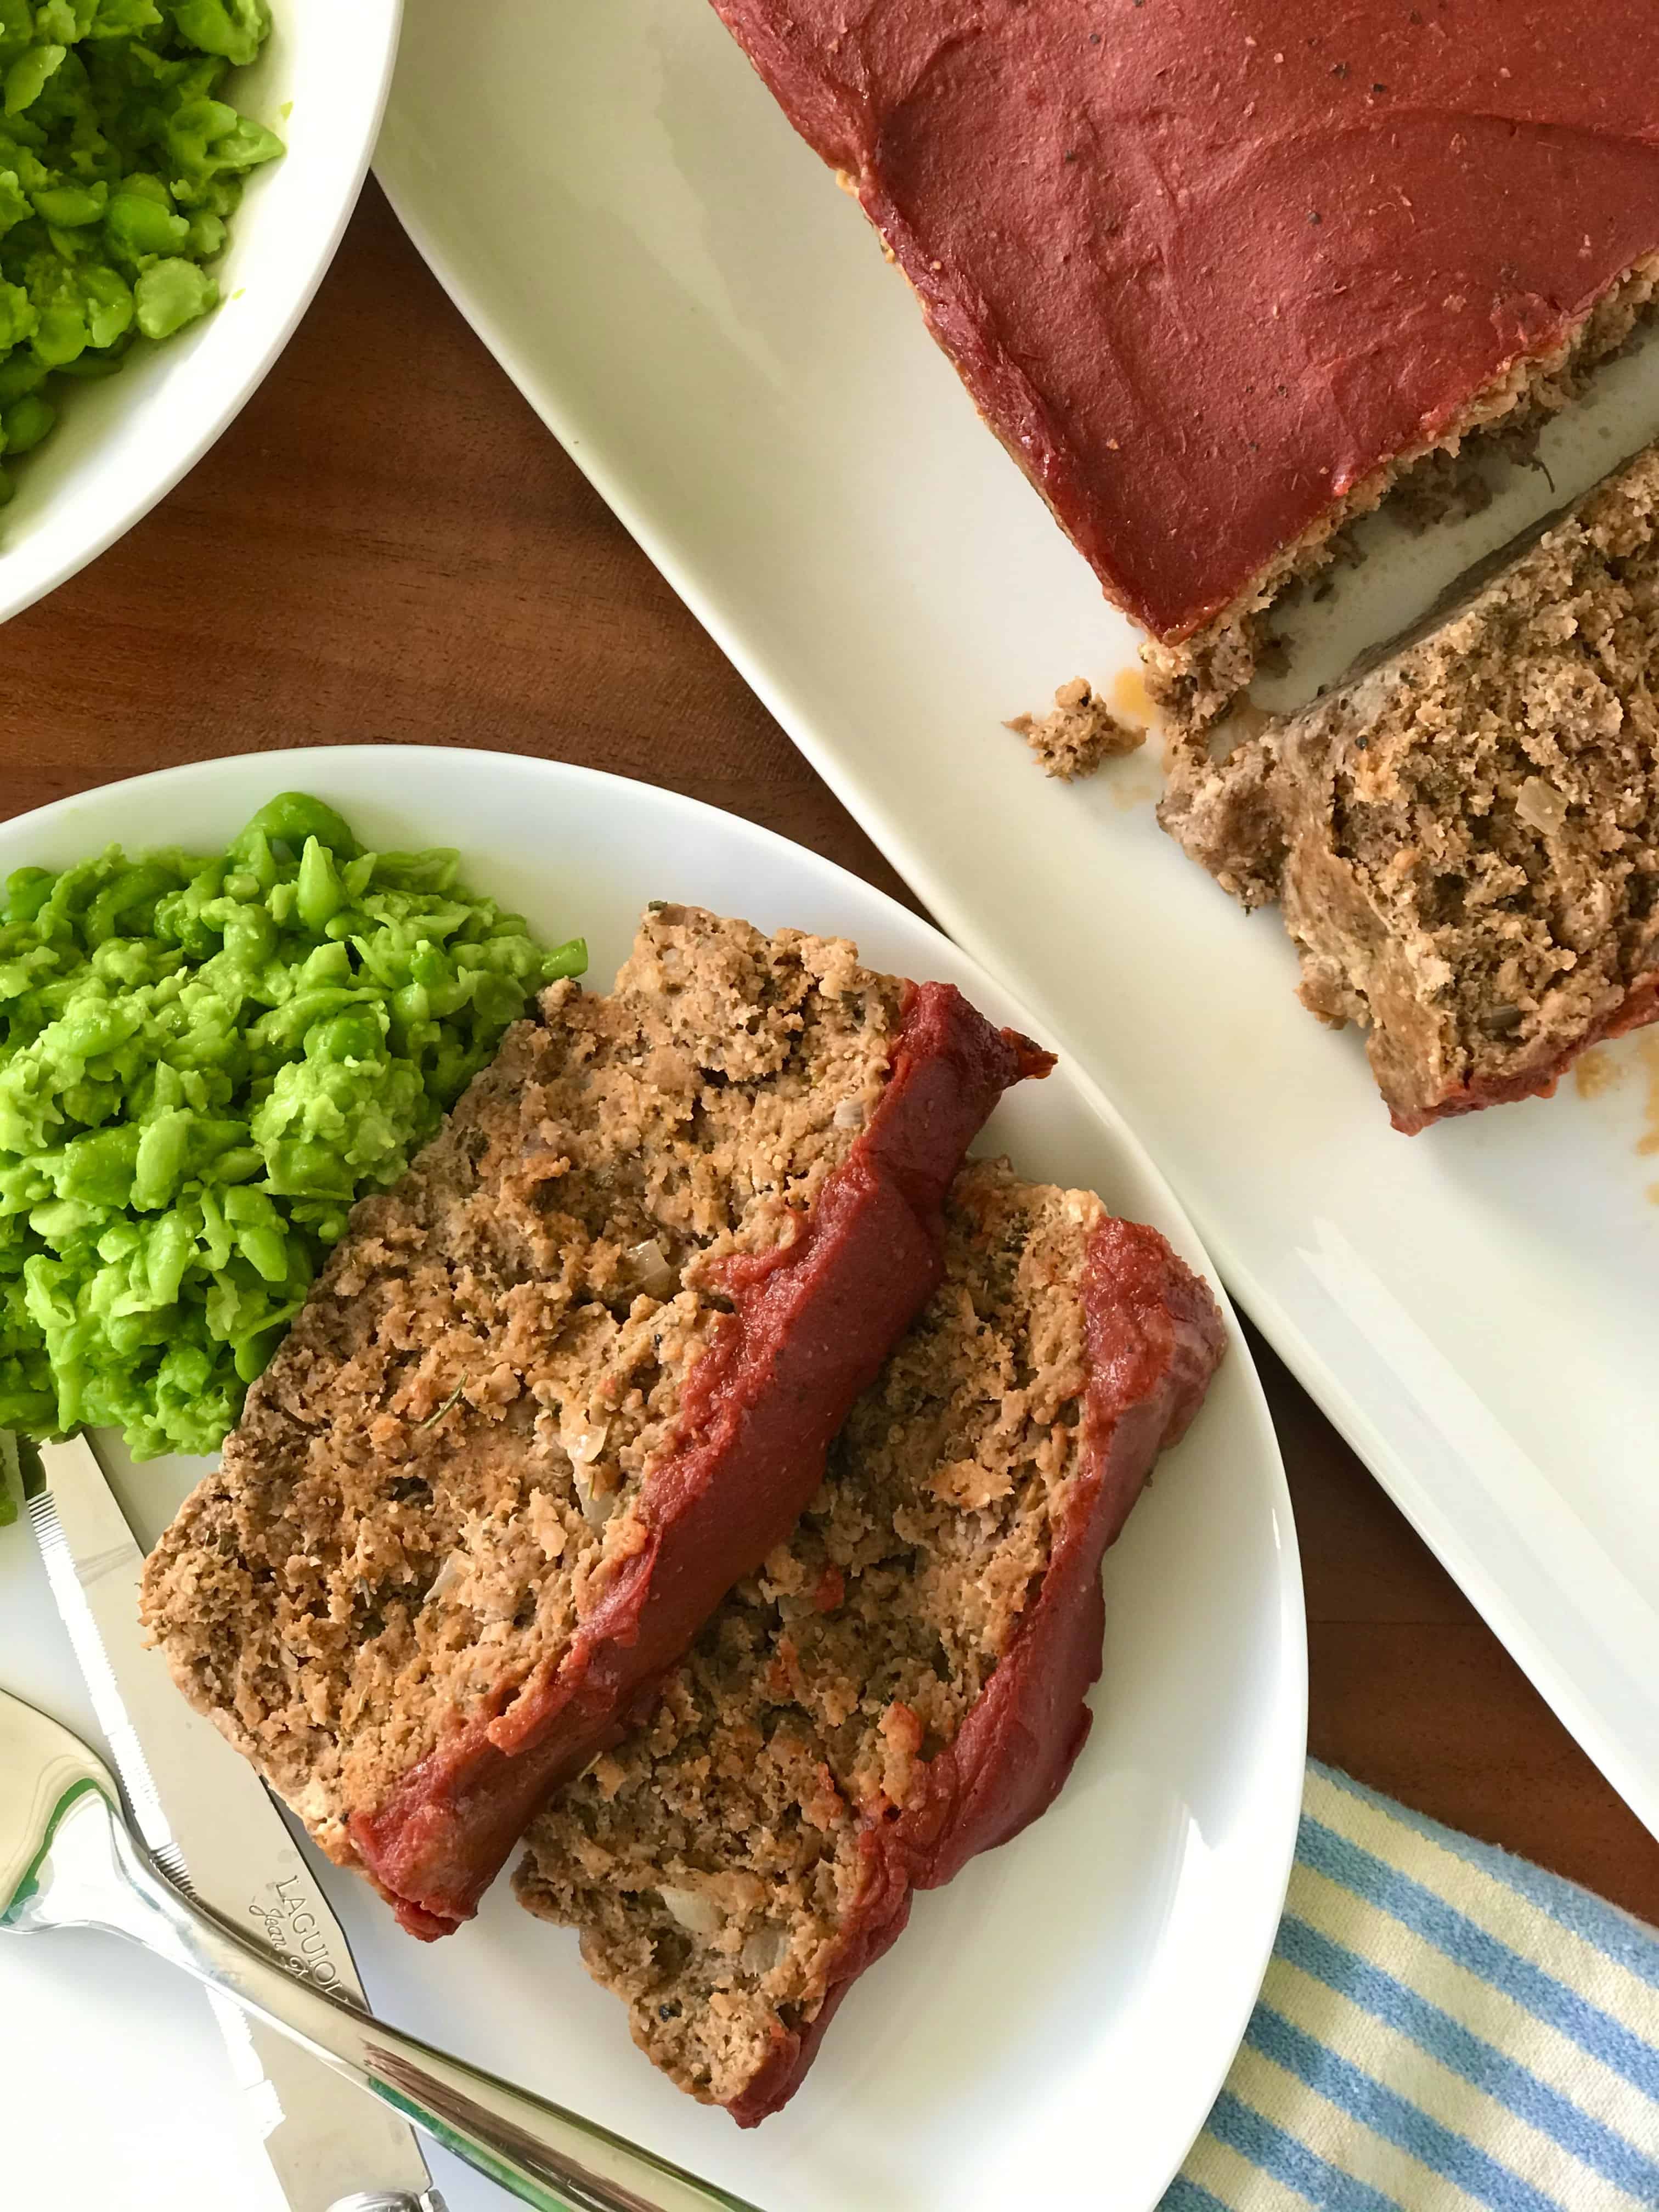 A Paleo meatloaf sliced on a white plate with mashed peas, fork and knife.